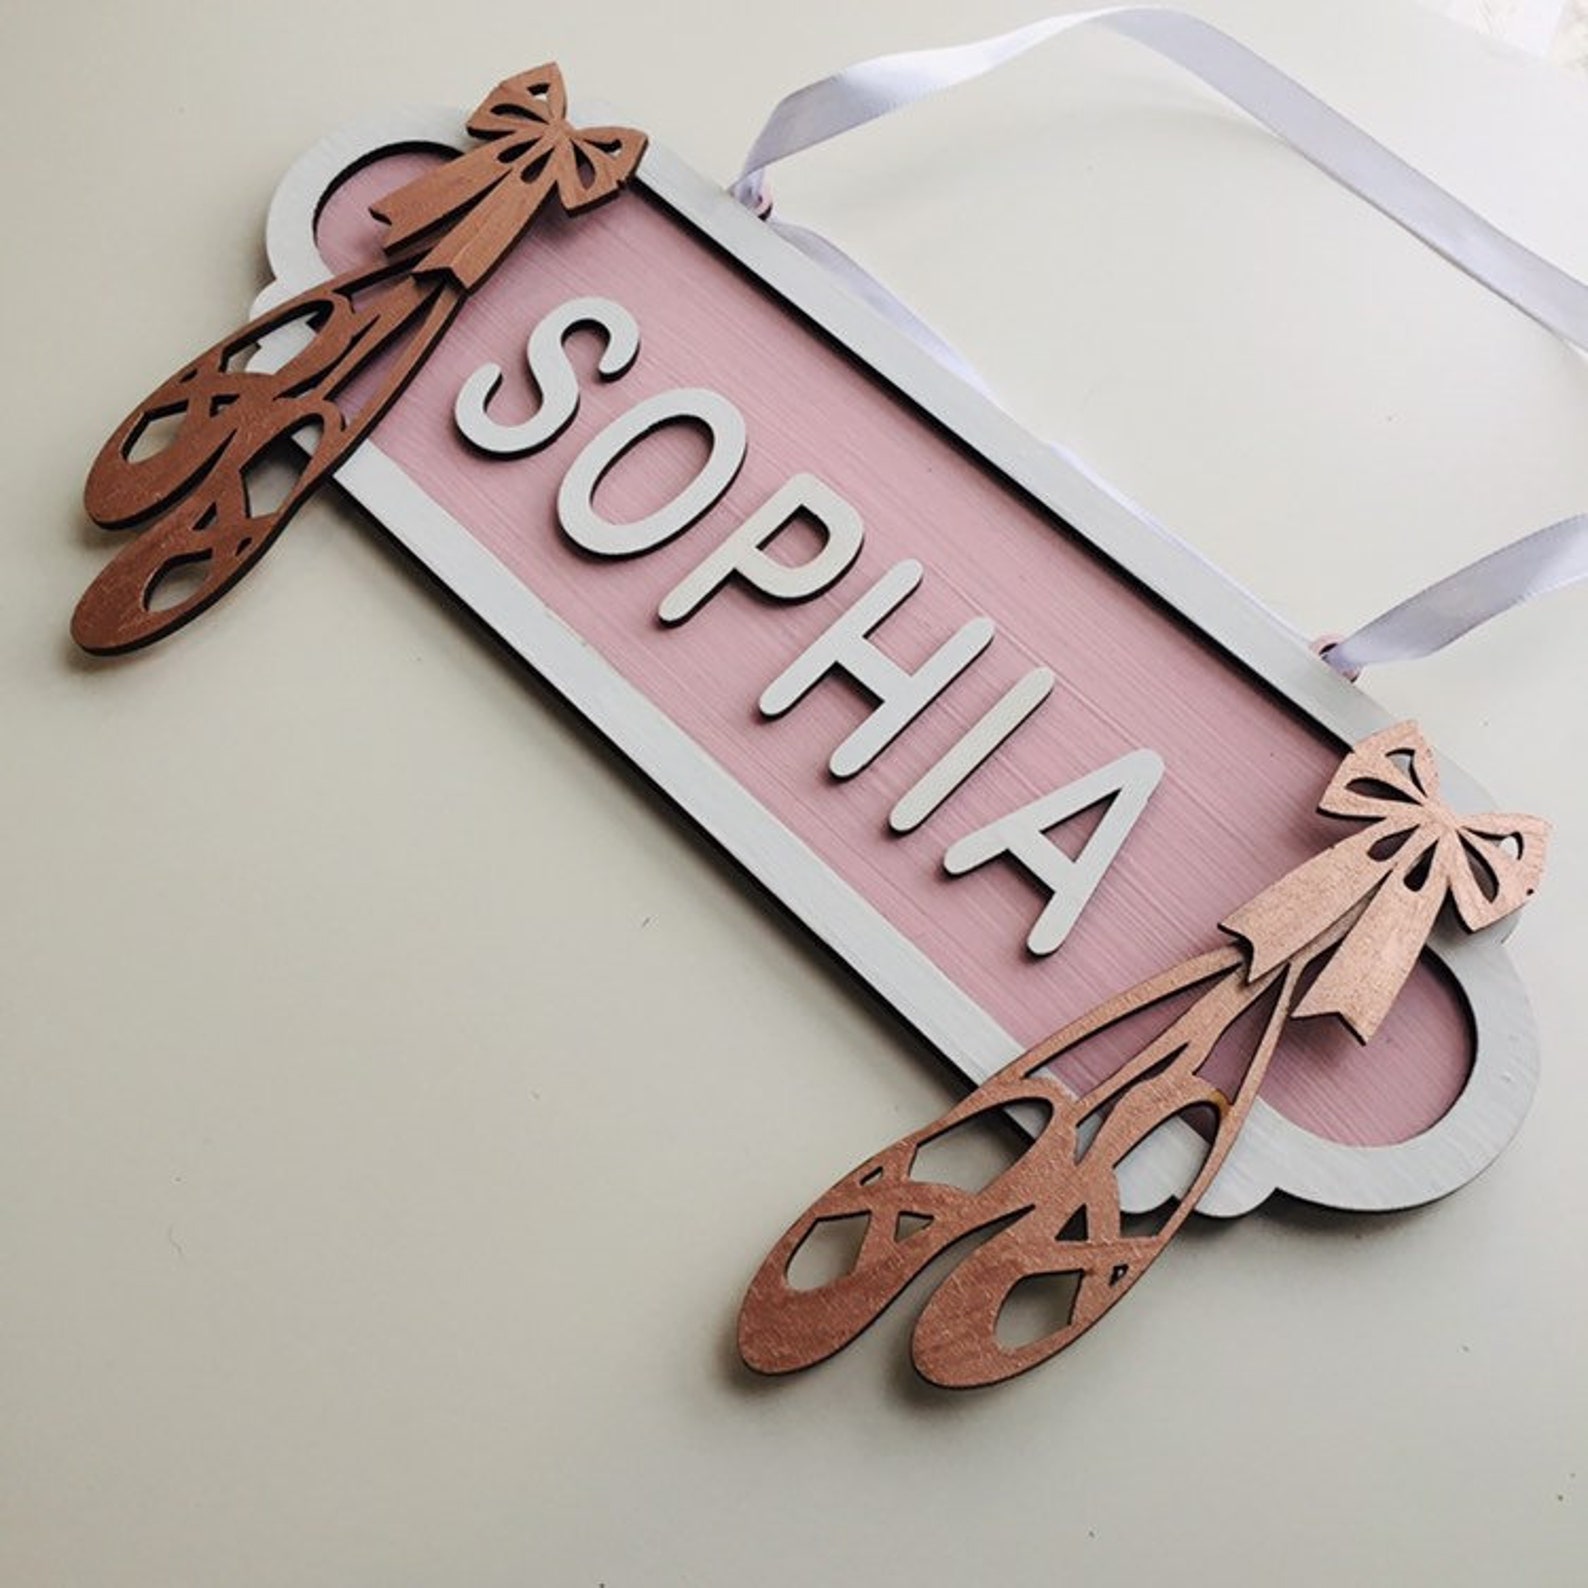 ballet street sign, girls birthday gift, rose gold sign, personalised wooden plaque, new baby present, rosegold decor